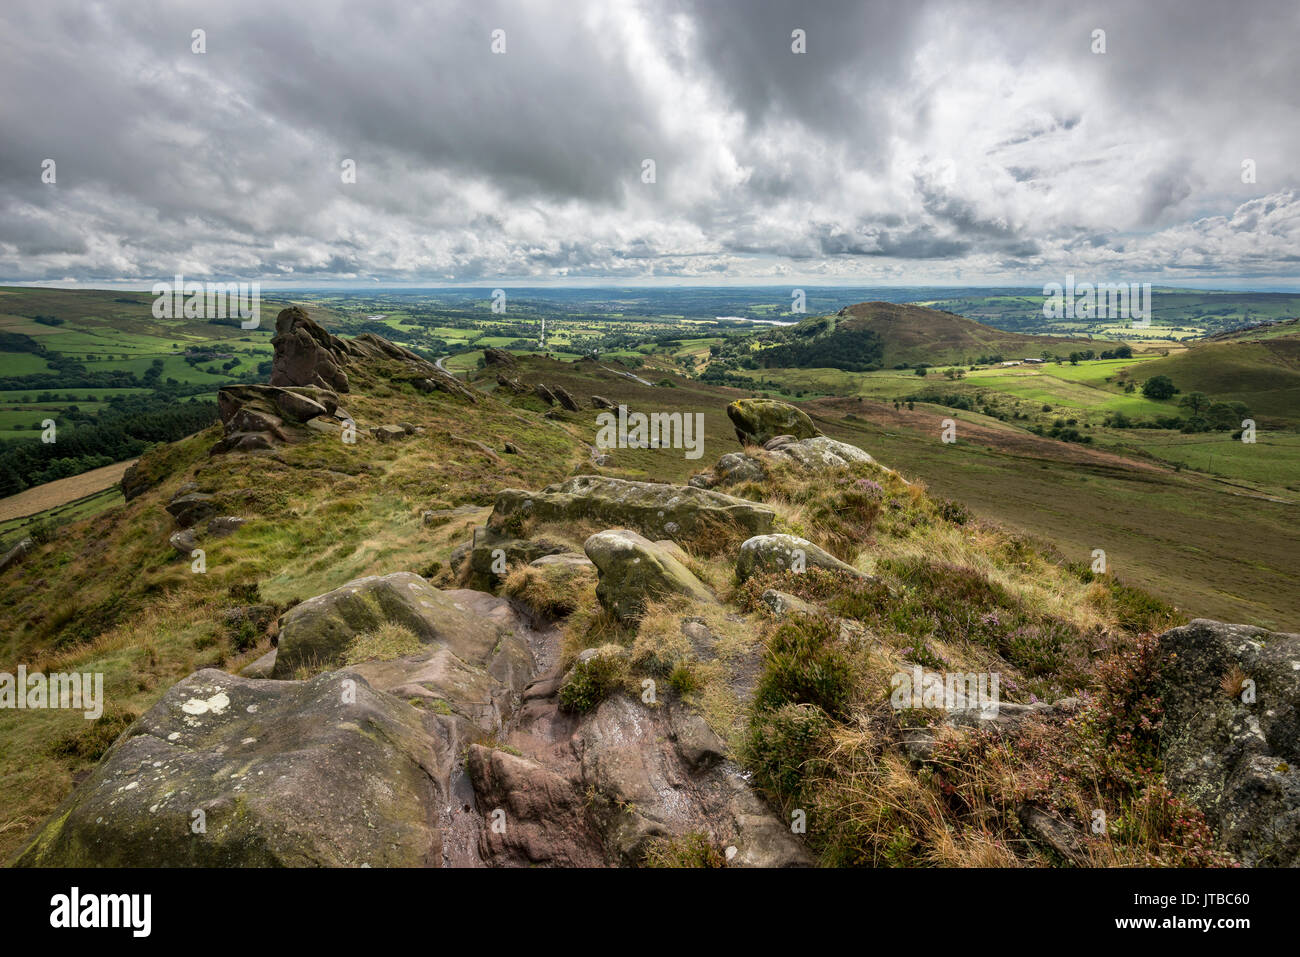 Dramatic landscape at Ramshaw rocks near The Roaches, Staffordshire, England. Stock Photo